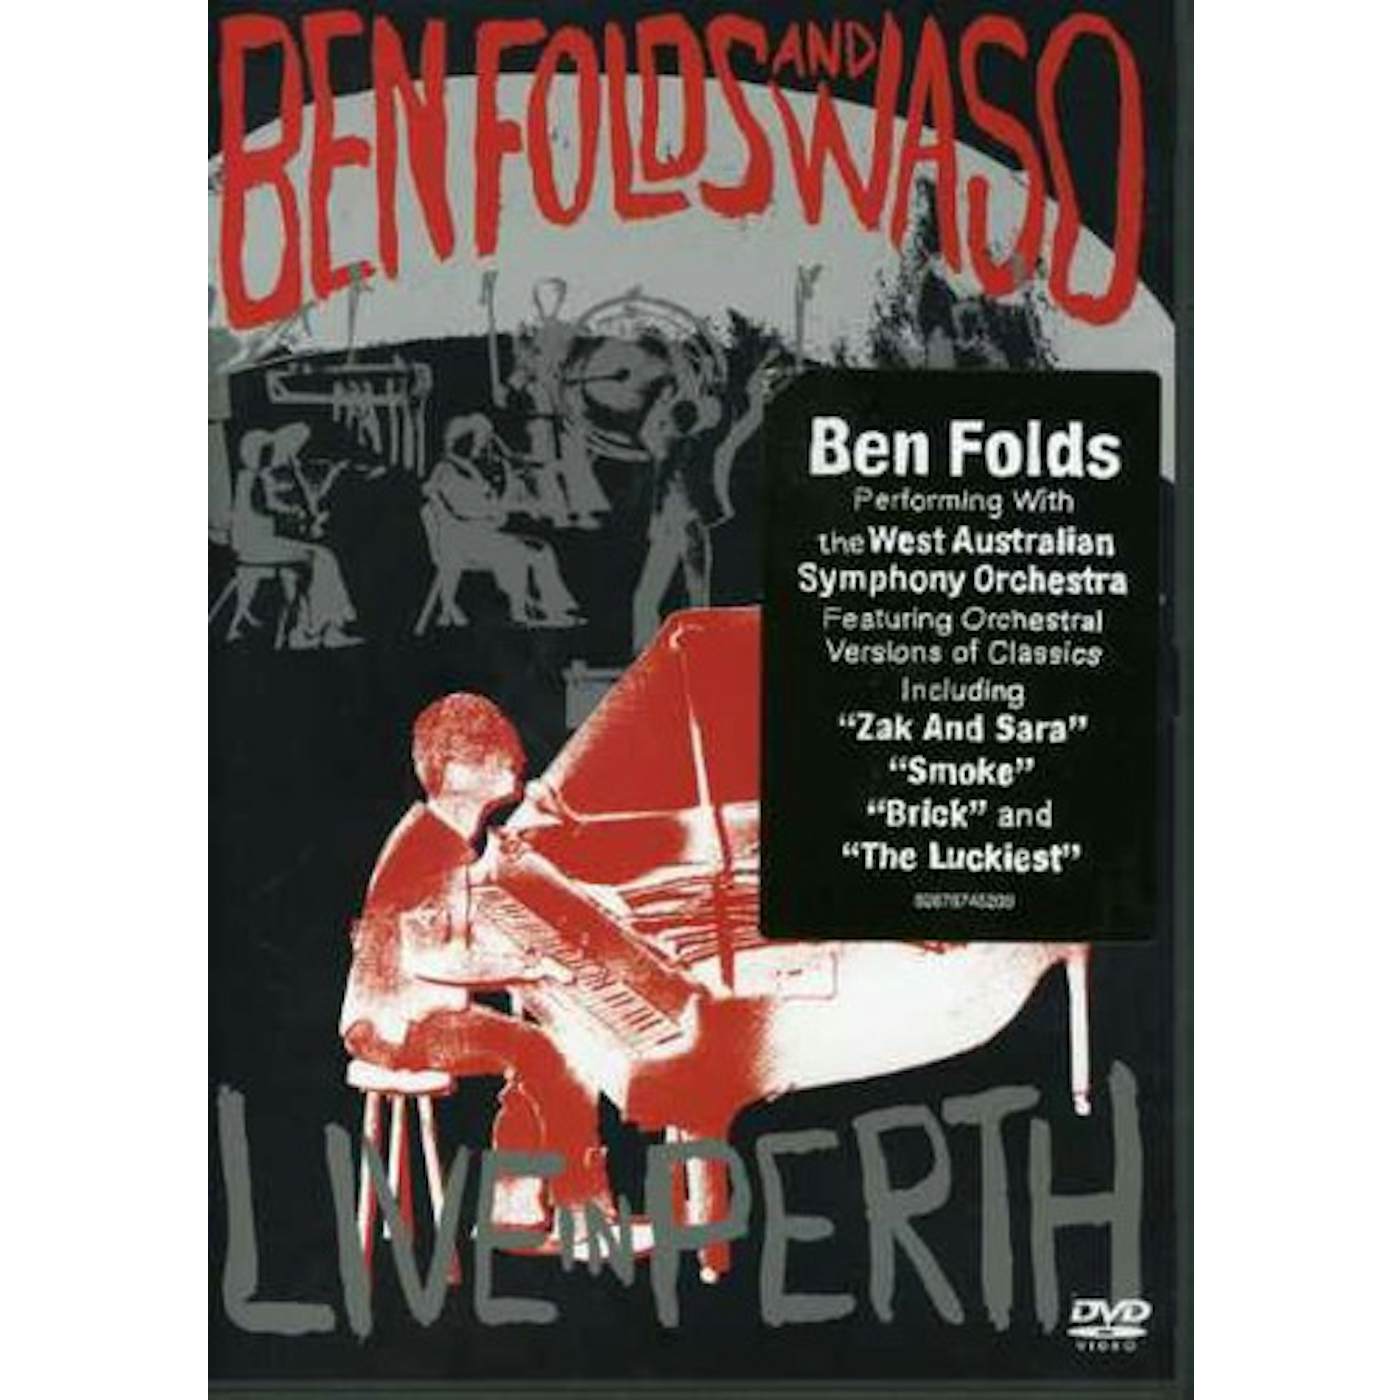 BEN FOLDS & WASO LIVE IN PERTH DVD